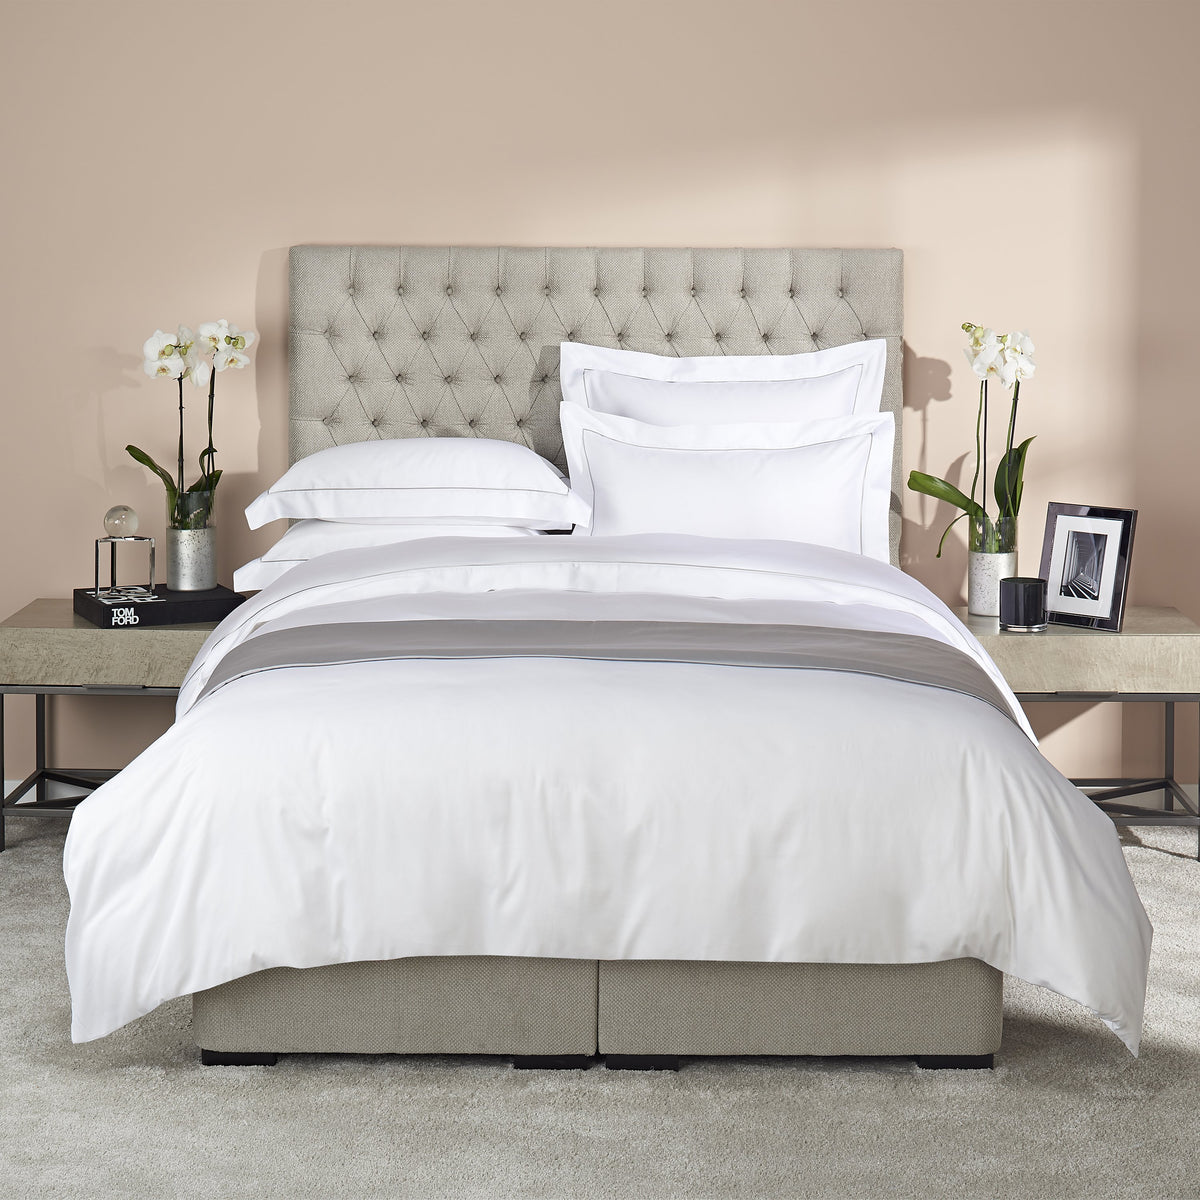 Heirlooms luxuriously soft Savoy bedroom duvet with 600 thread count cotton sateen combined with an elegant satin white, silver or sand colour piping